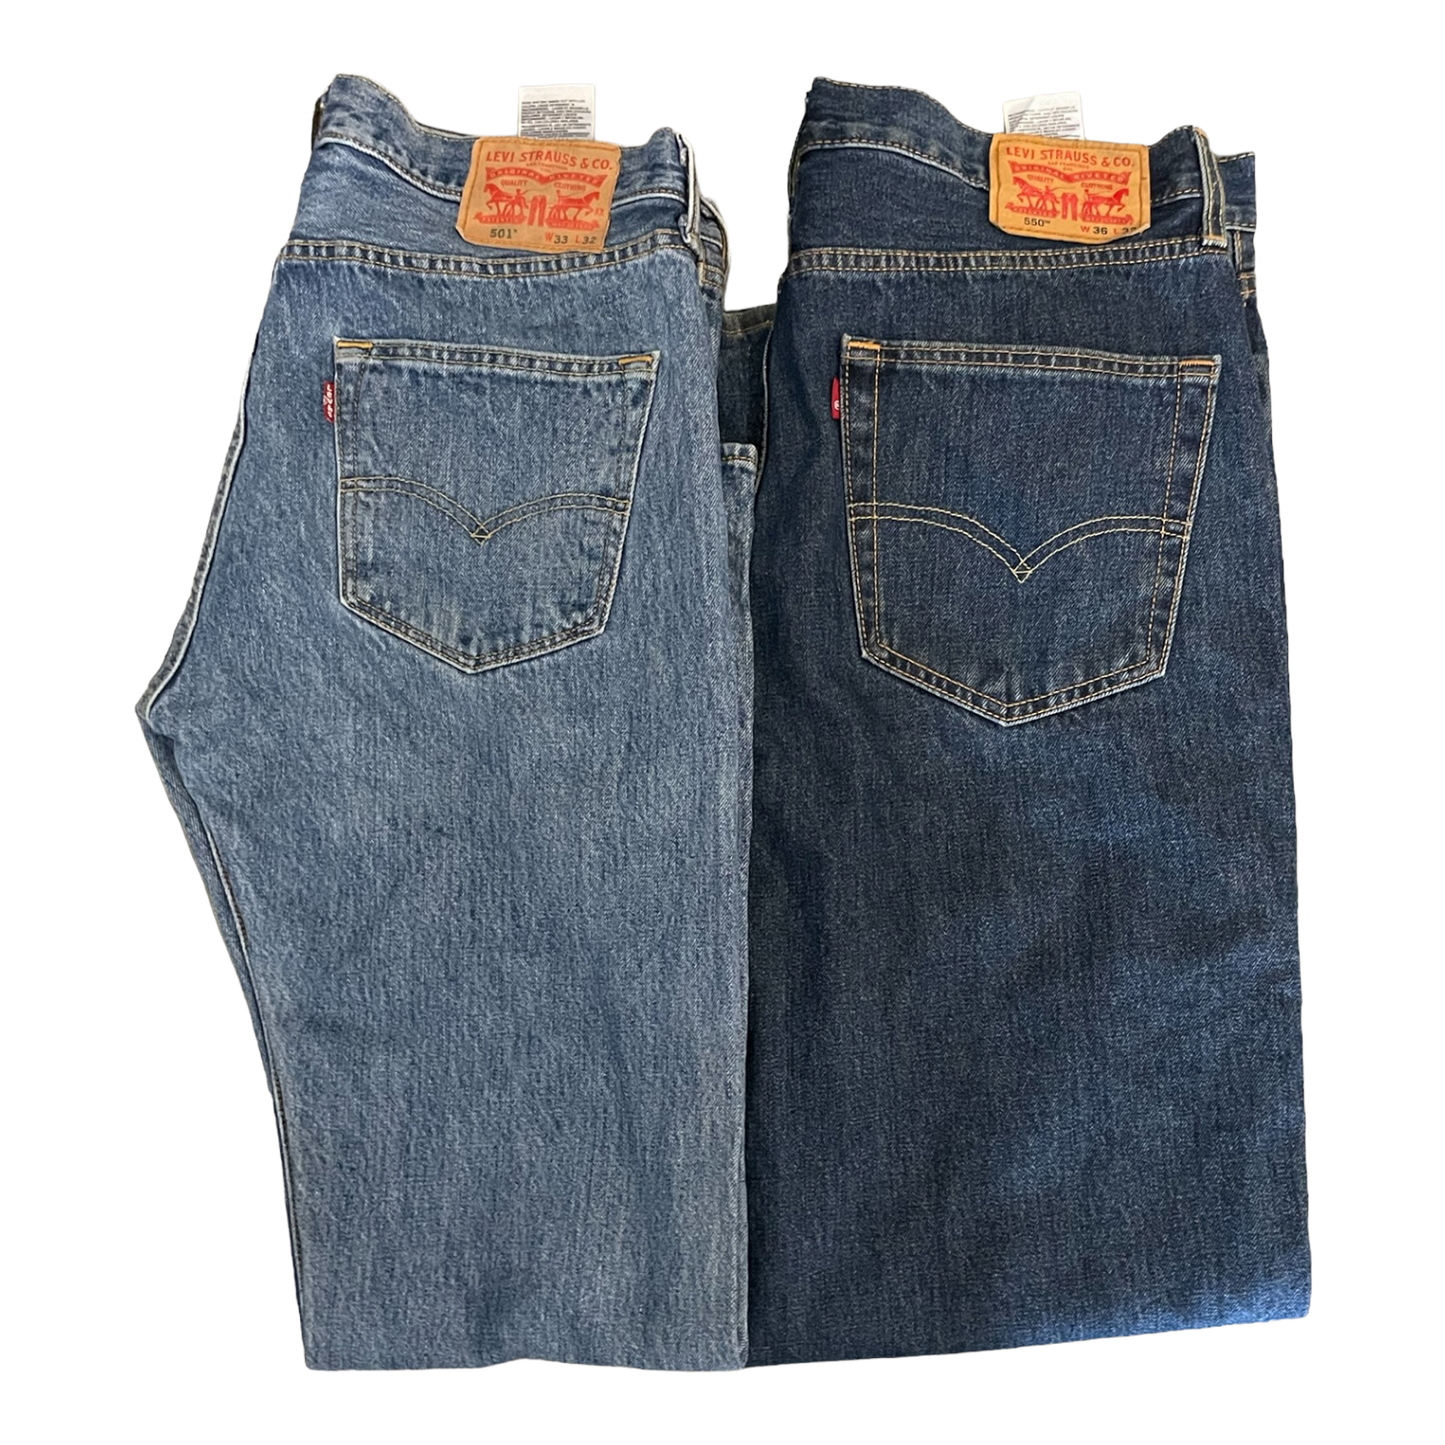 Women's Levi's Jeans Intro Pack